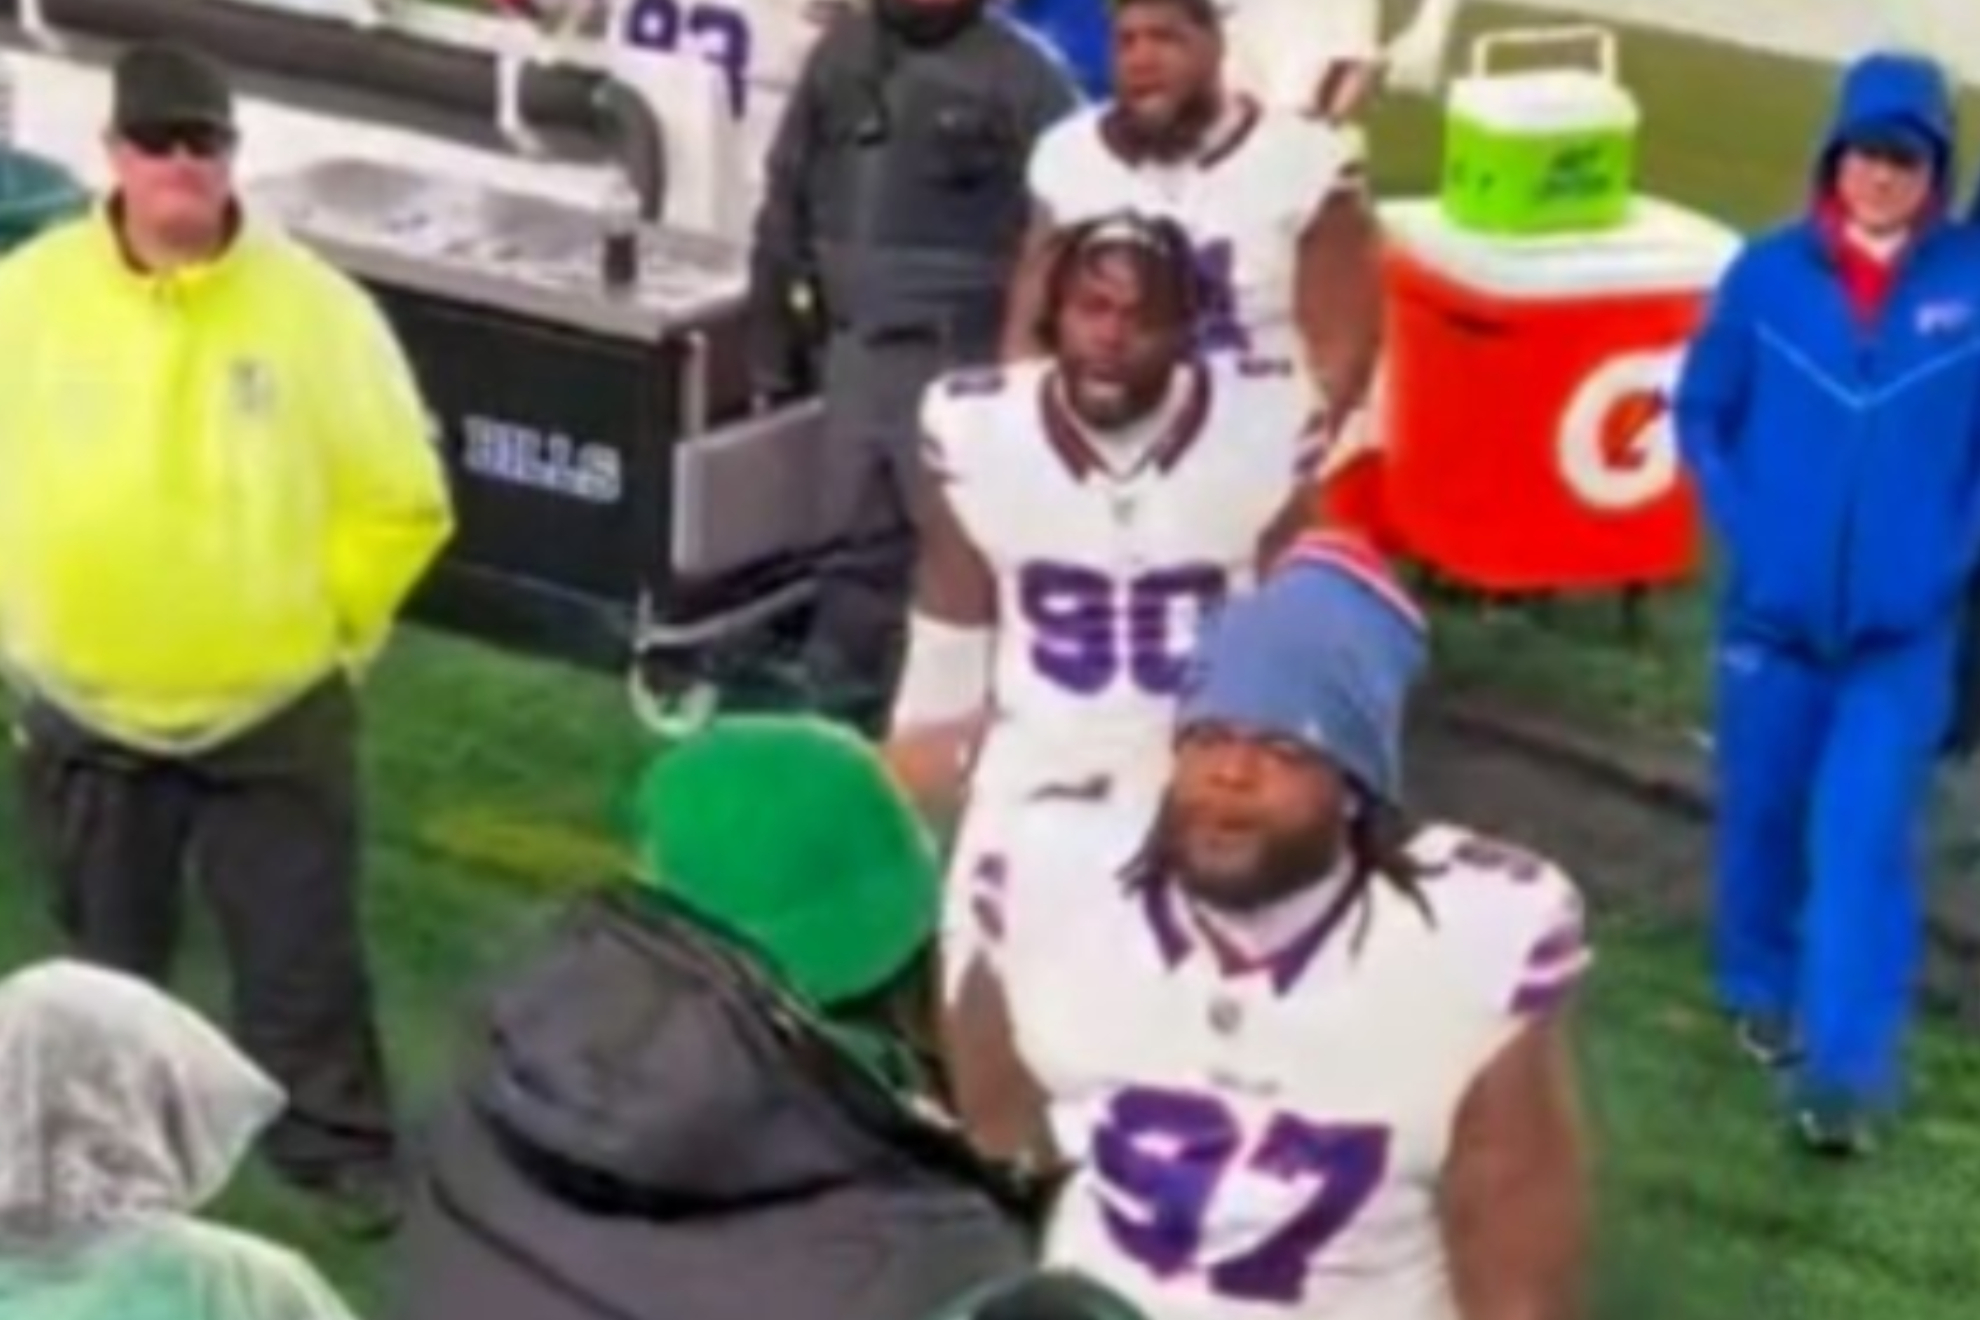 Bills Players' confrontation with Eagles fans escalates during game dispute